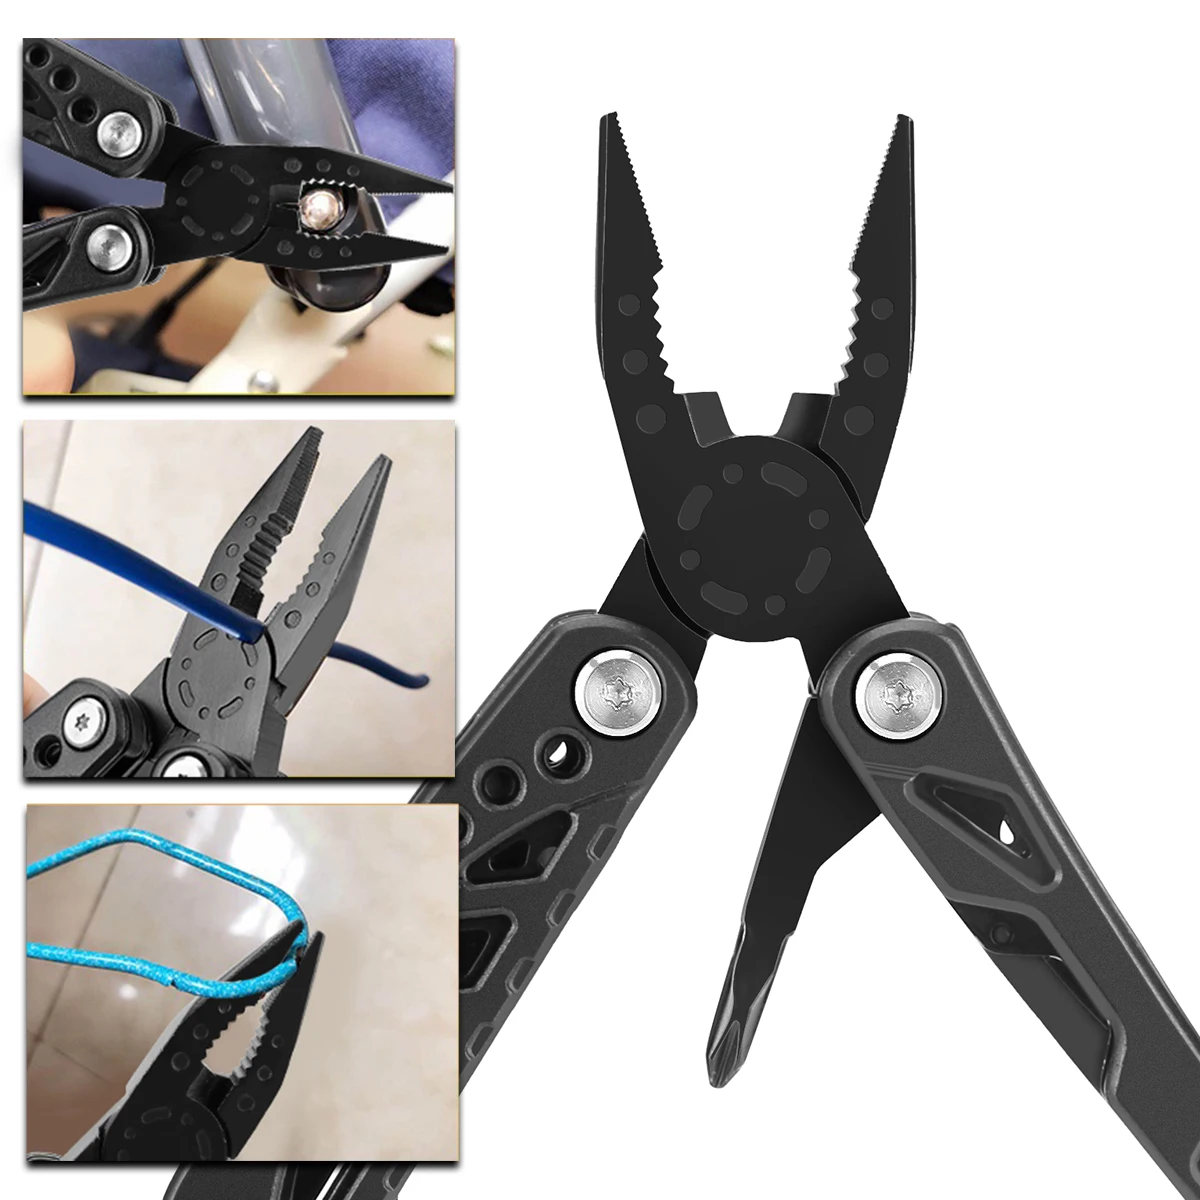 Multitool Pliers, Multi-Purpose Folding Knives Keychain Pliers for Outdoor Survival Camping Hiking Emergency Hand Tool